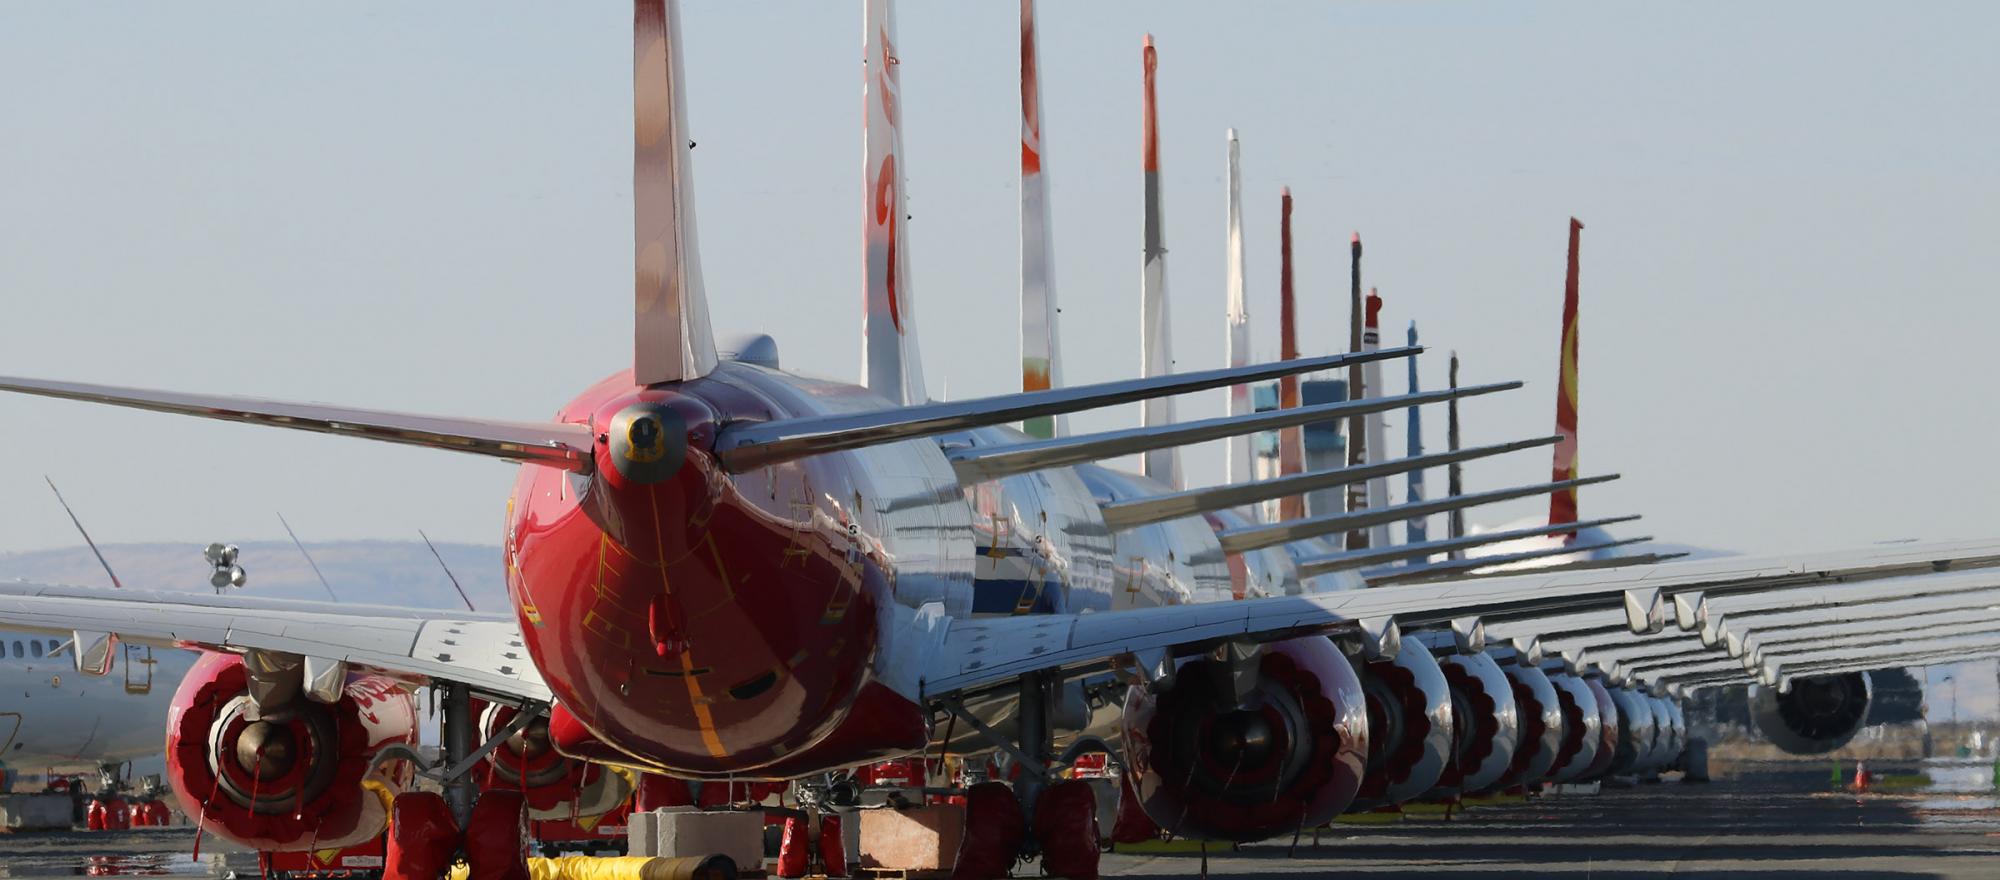 A row of stored 737 Max jets sits idle in Moses Lake, Washington, awaiting an FAA directive to allow the model to re-enter service. (Photo: Barry Ambrose)